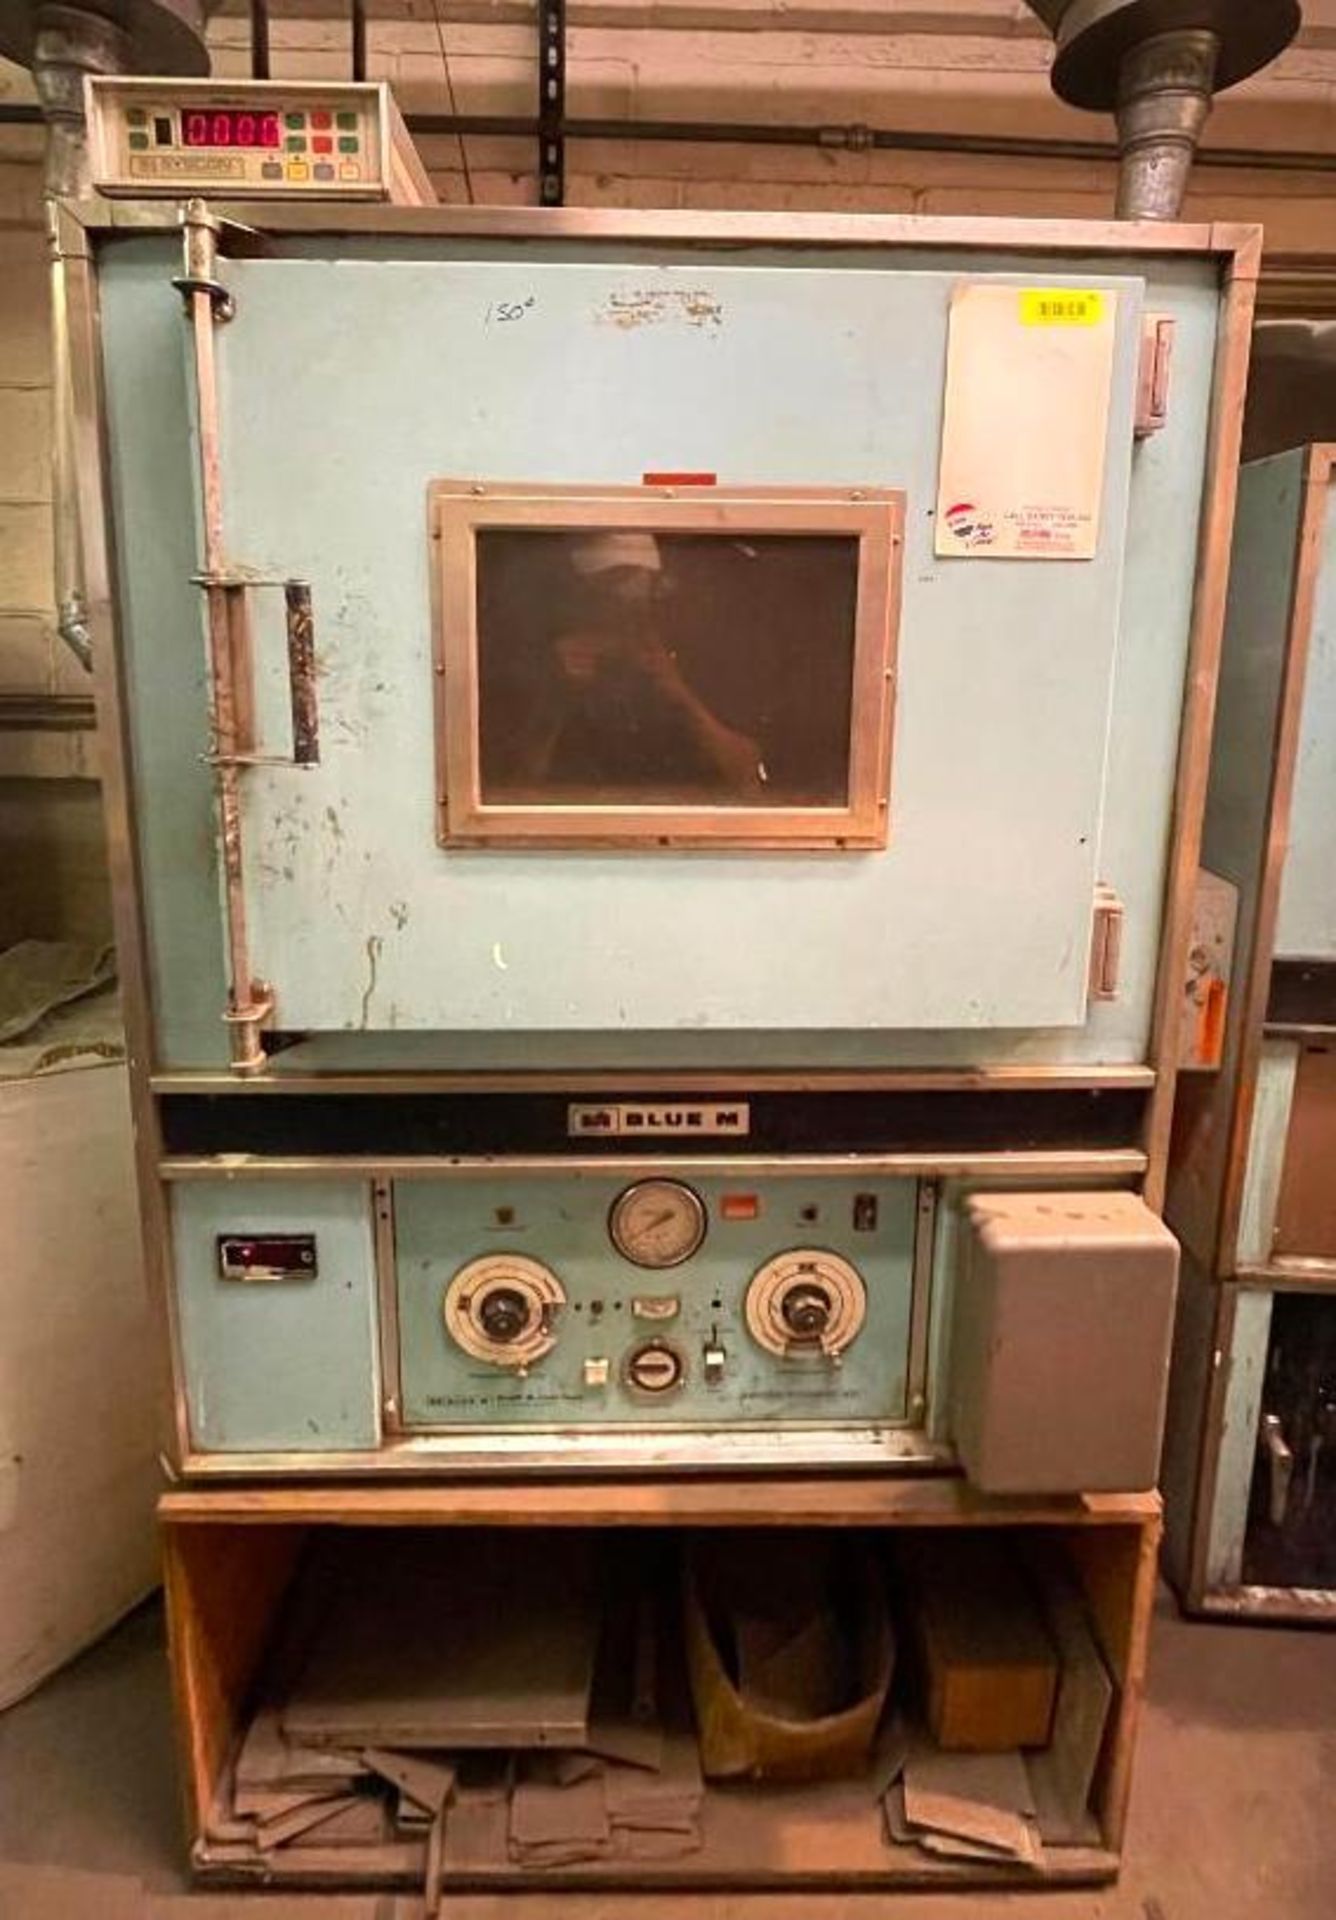 BLUE M POWER-O-MATIC 70 INDUSTRIAL OVEN W/ SYSCON DIGITAL TEMPERATURE INDICATOR BRAND/MODEL: BLUE M